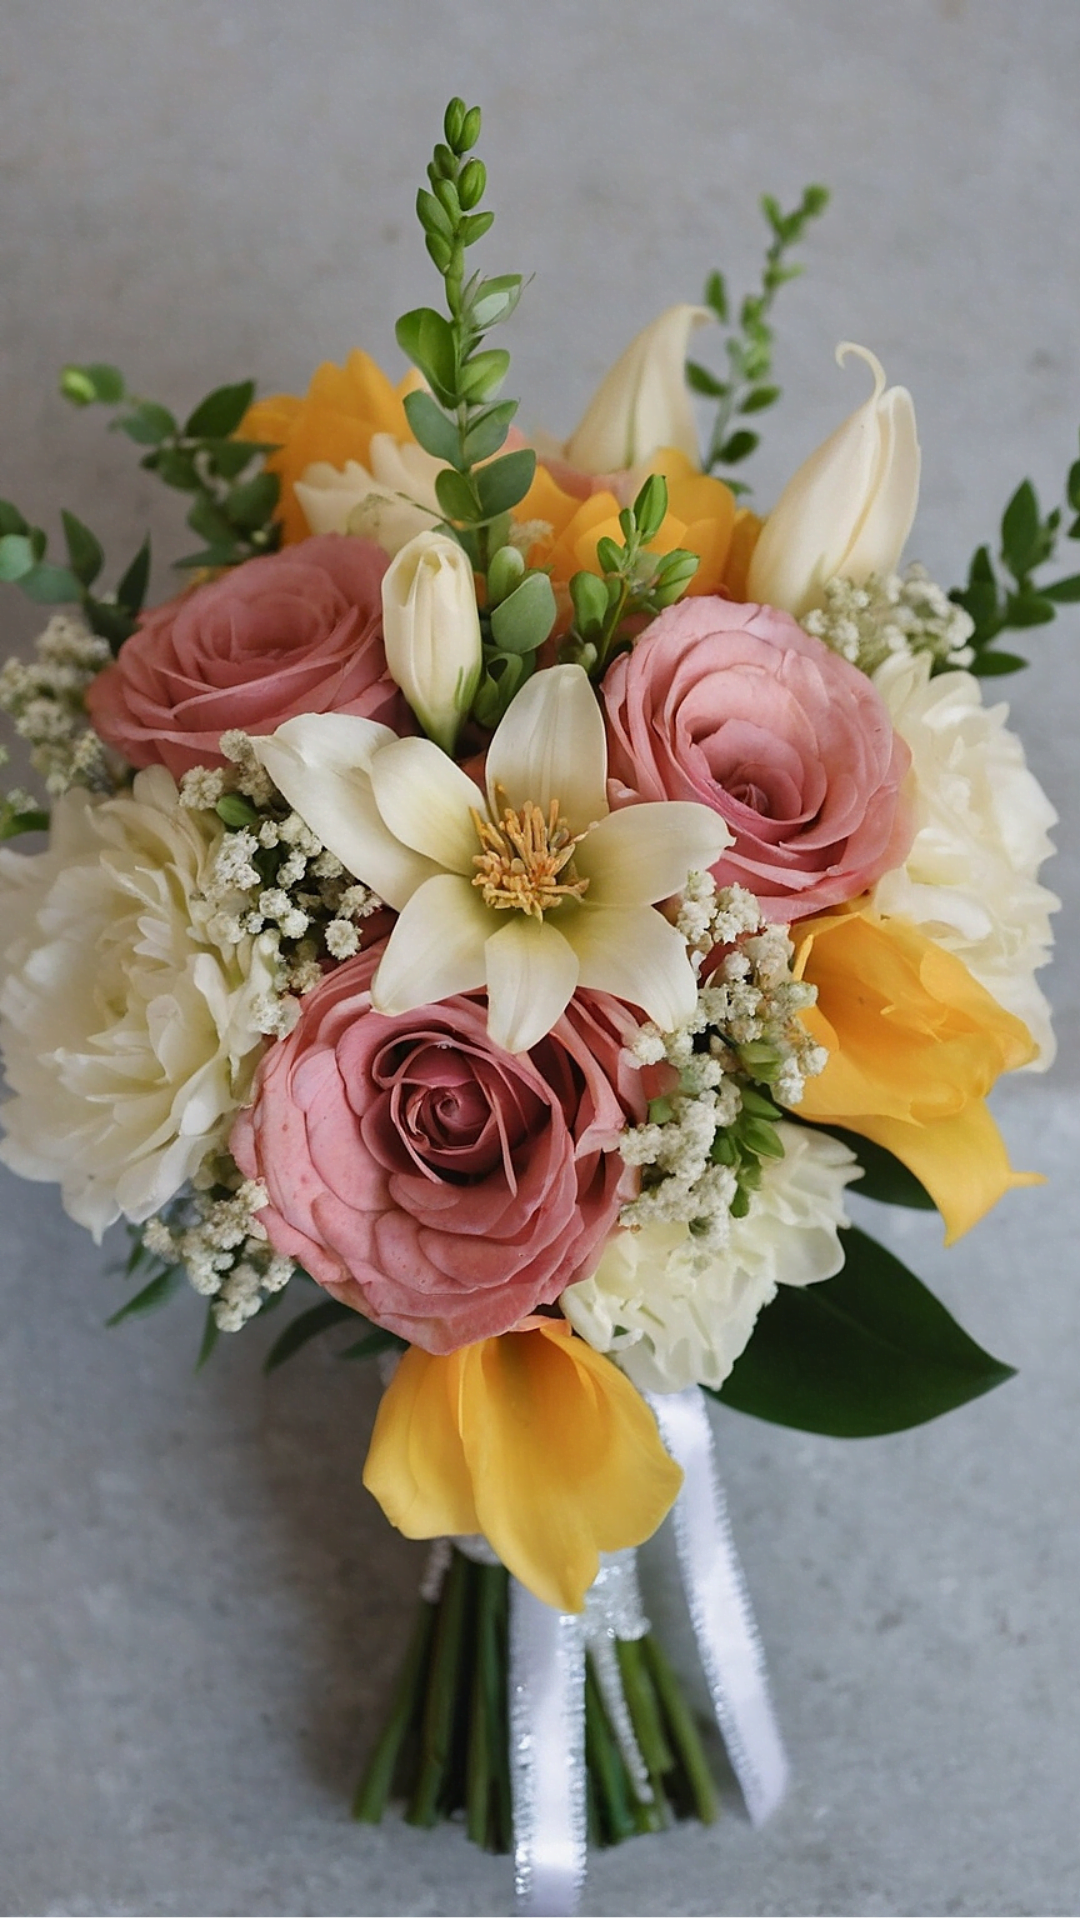 Trendsetter's Guide: Innovative Prom Bouquet Ideas